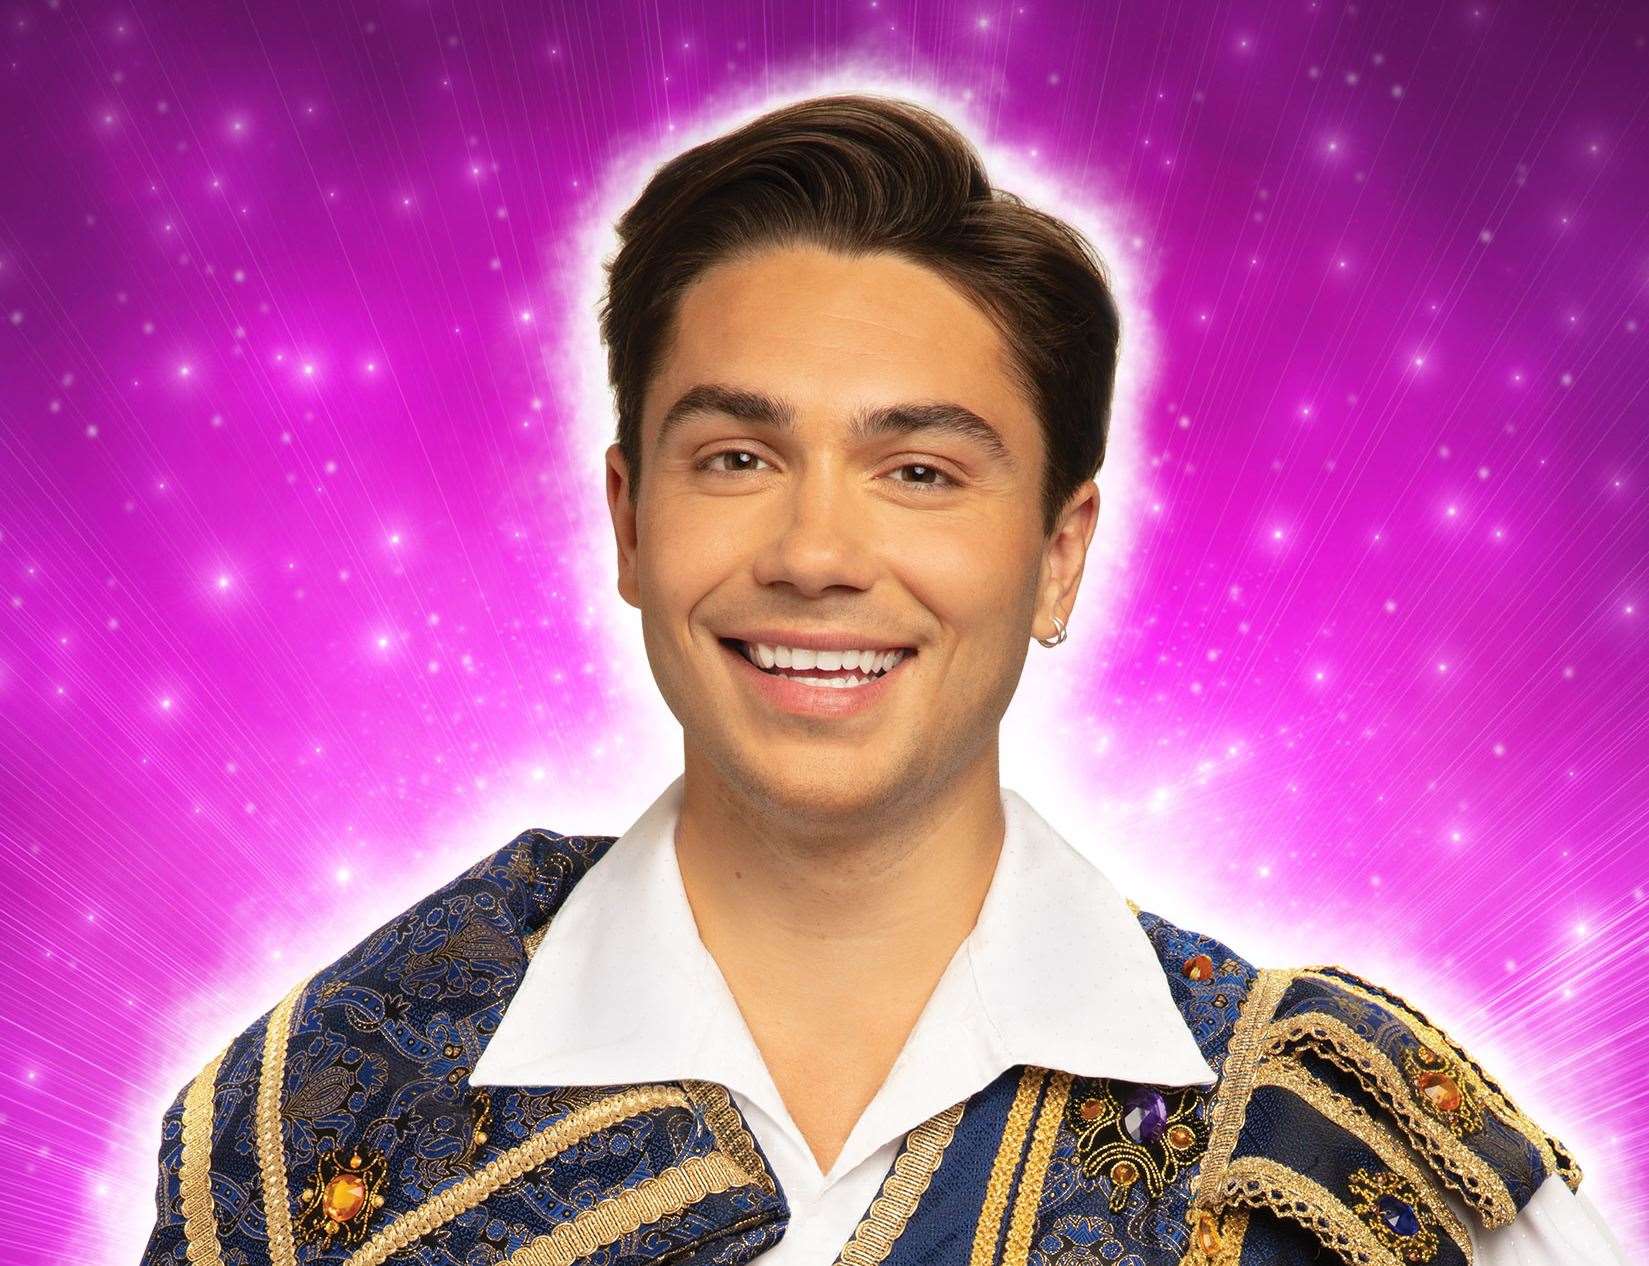 Get your £5 discount on tickets to the Orchard Theatre panto starring George Shelley